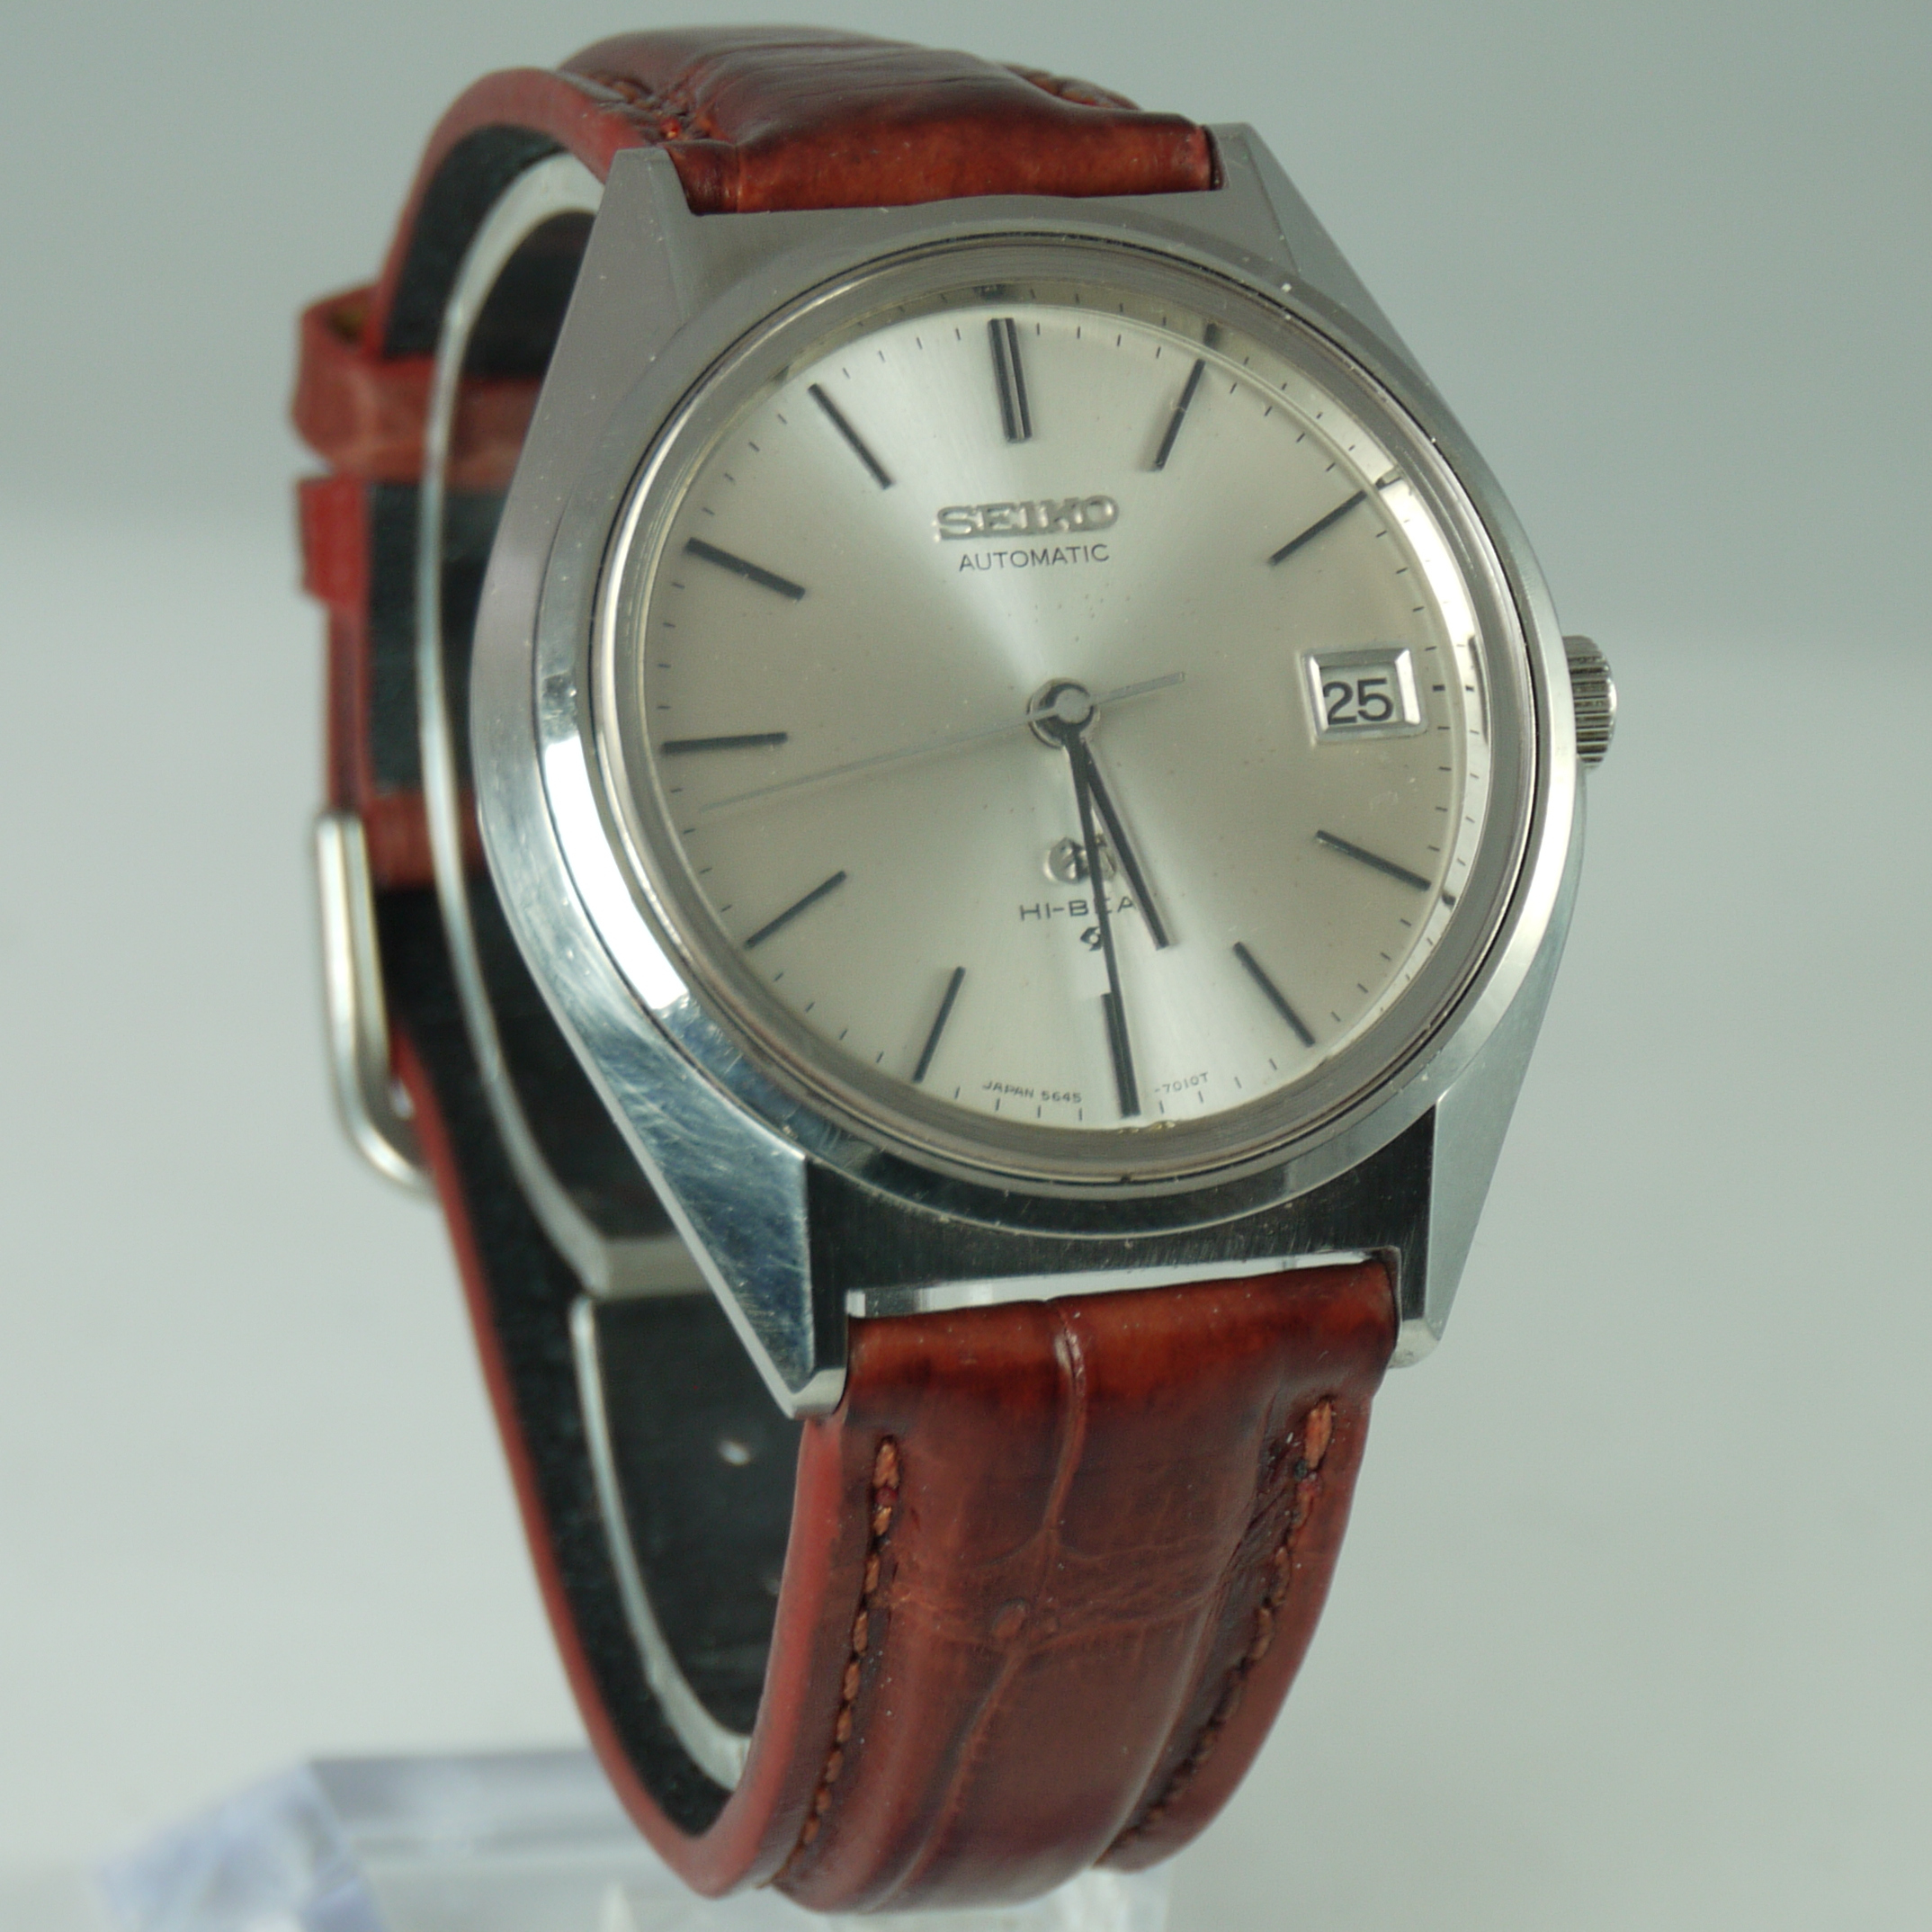 Grand Seiko Automatic wristwatch in stainless steel with a brown leather band